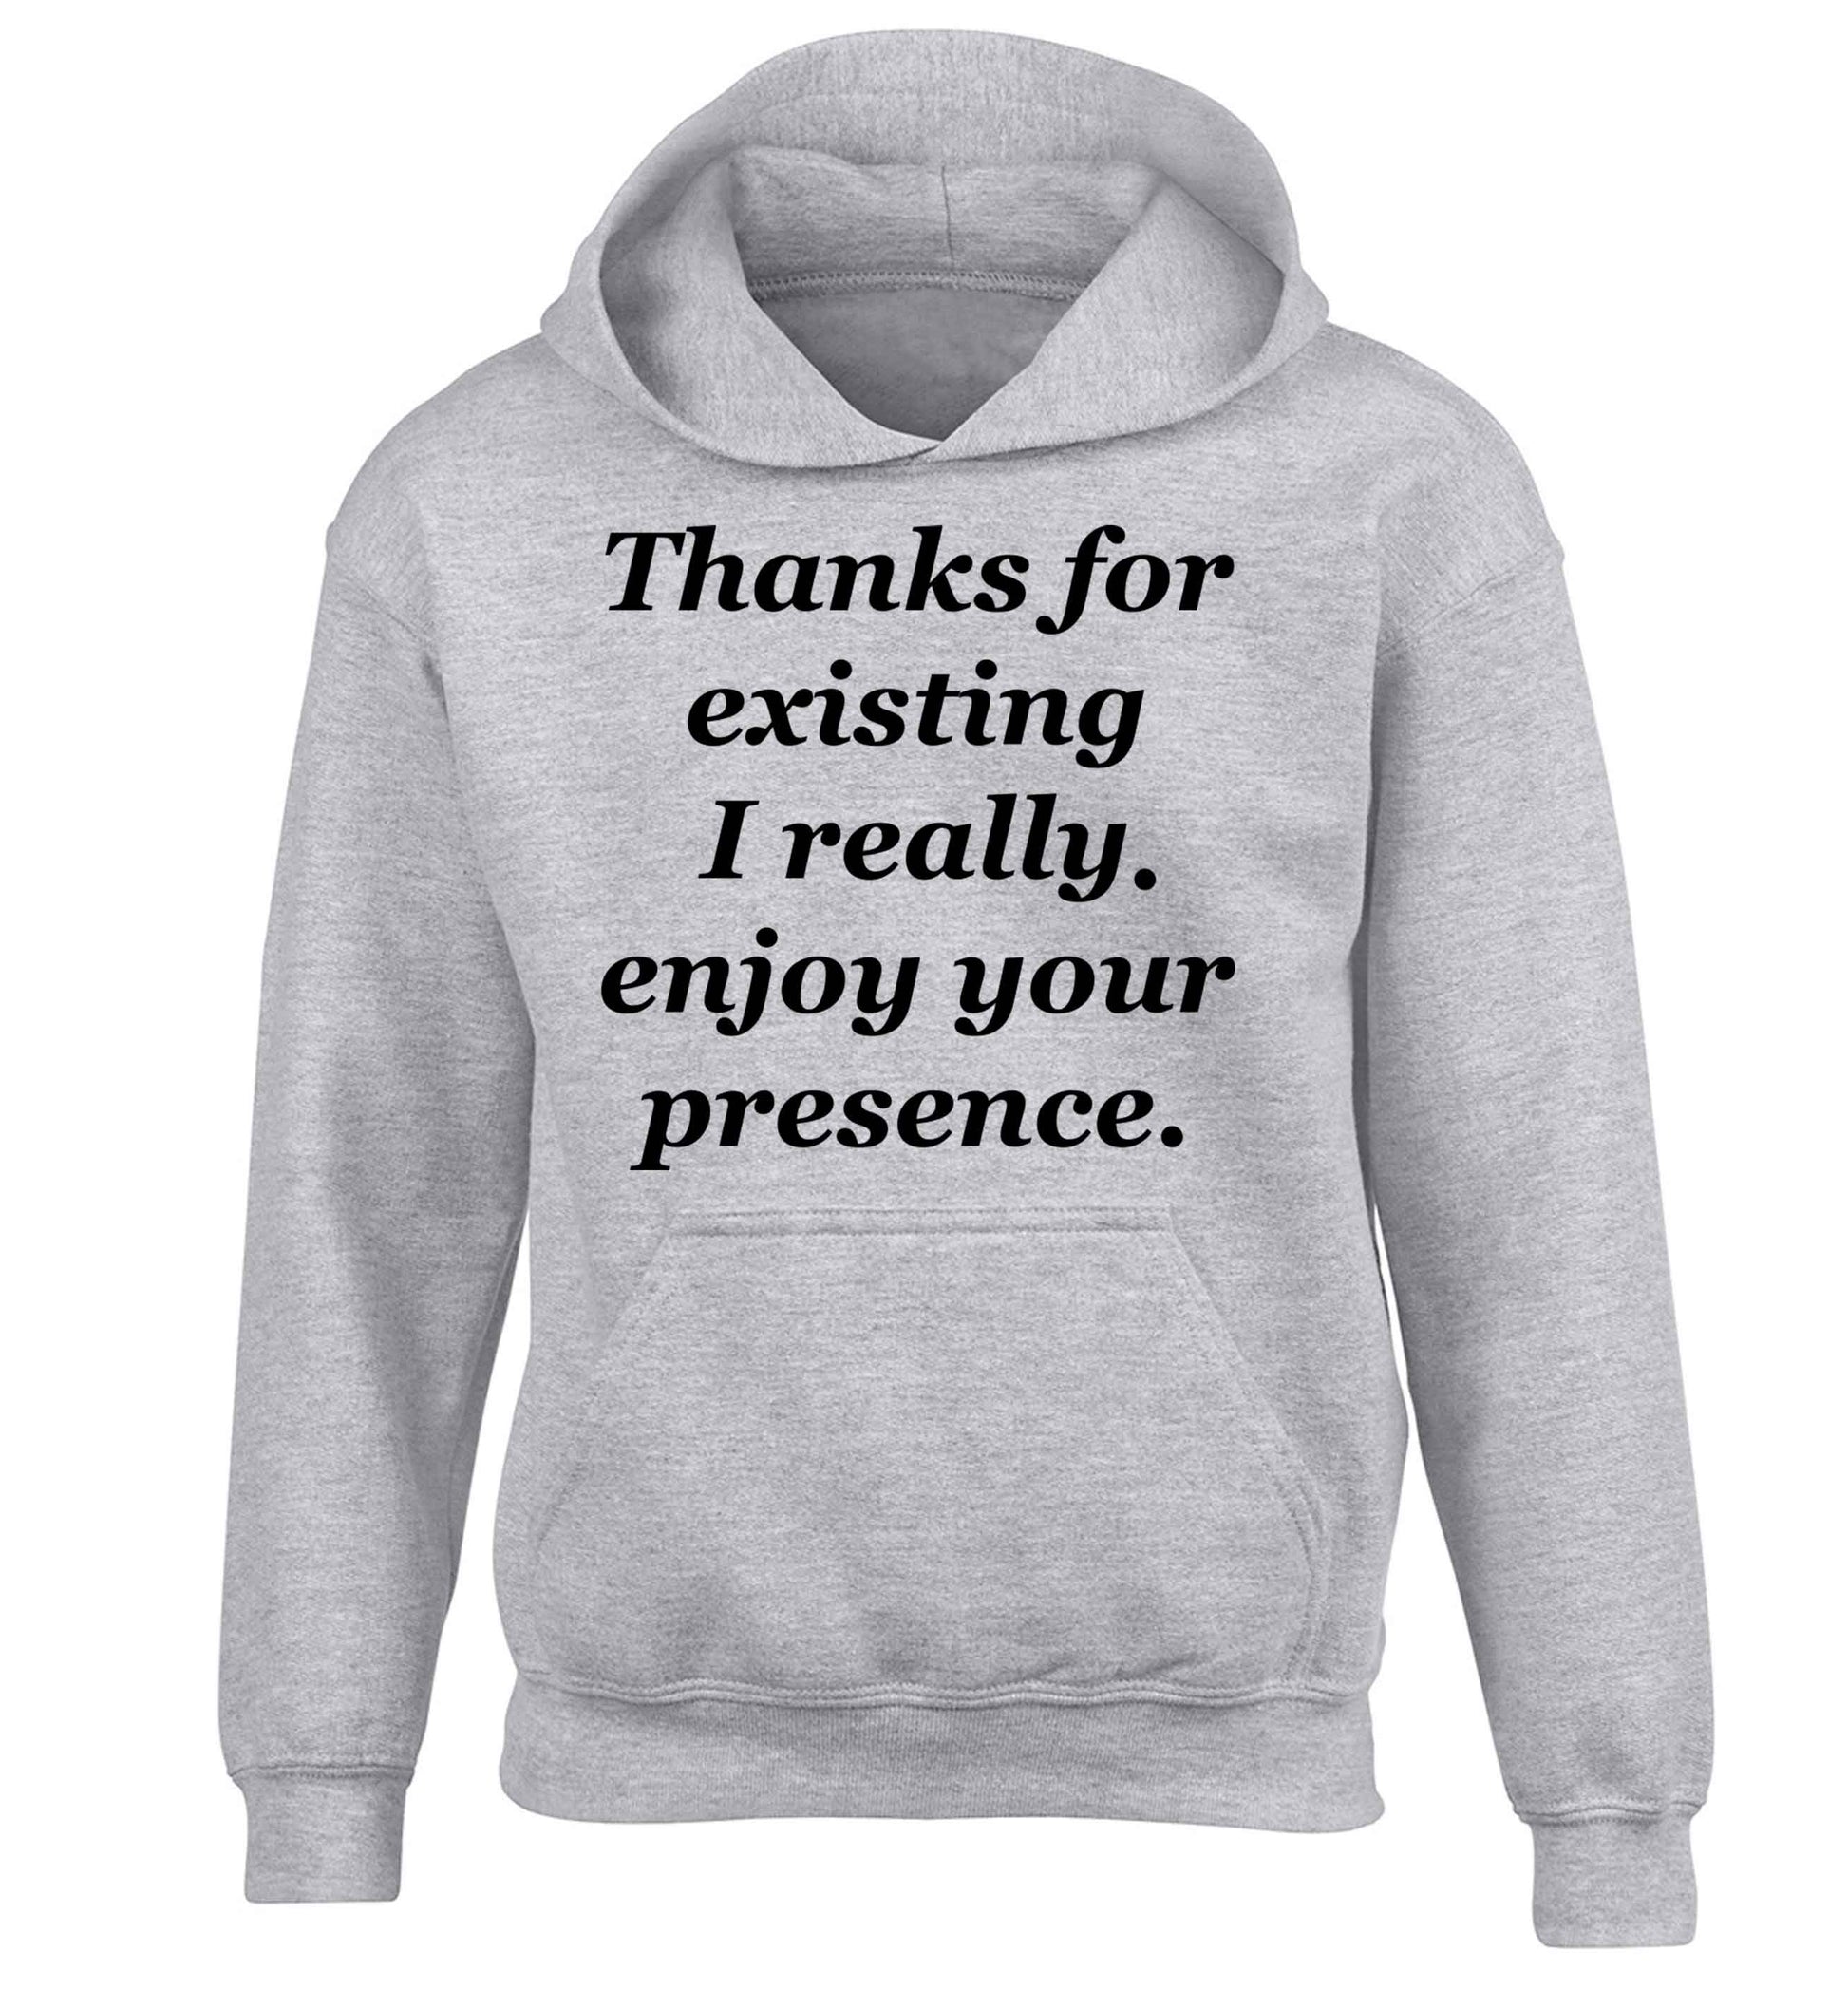 Thanks for existing I really enjoy your presence children's grey hoodie 12-13 Years